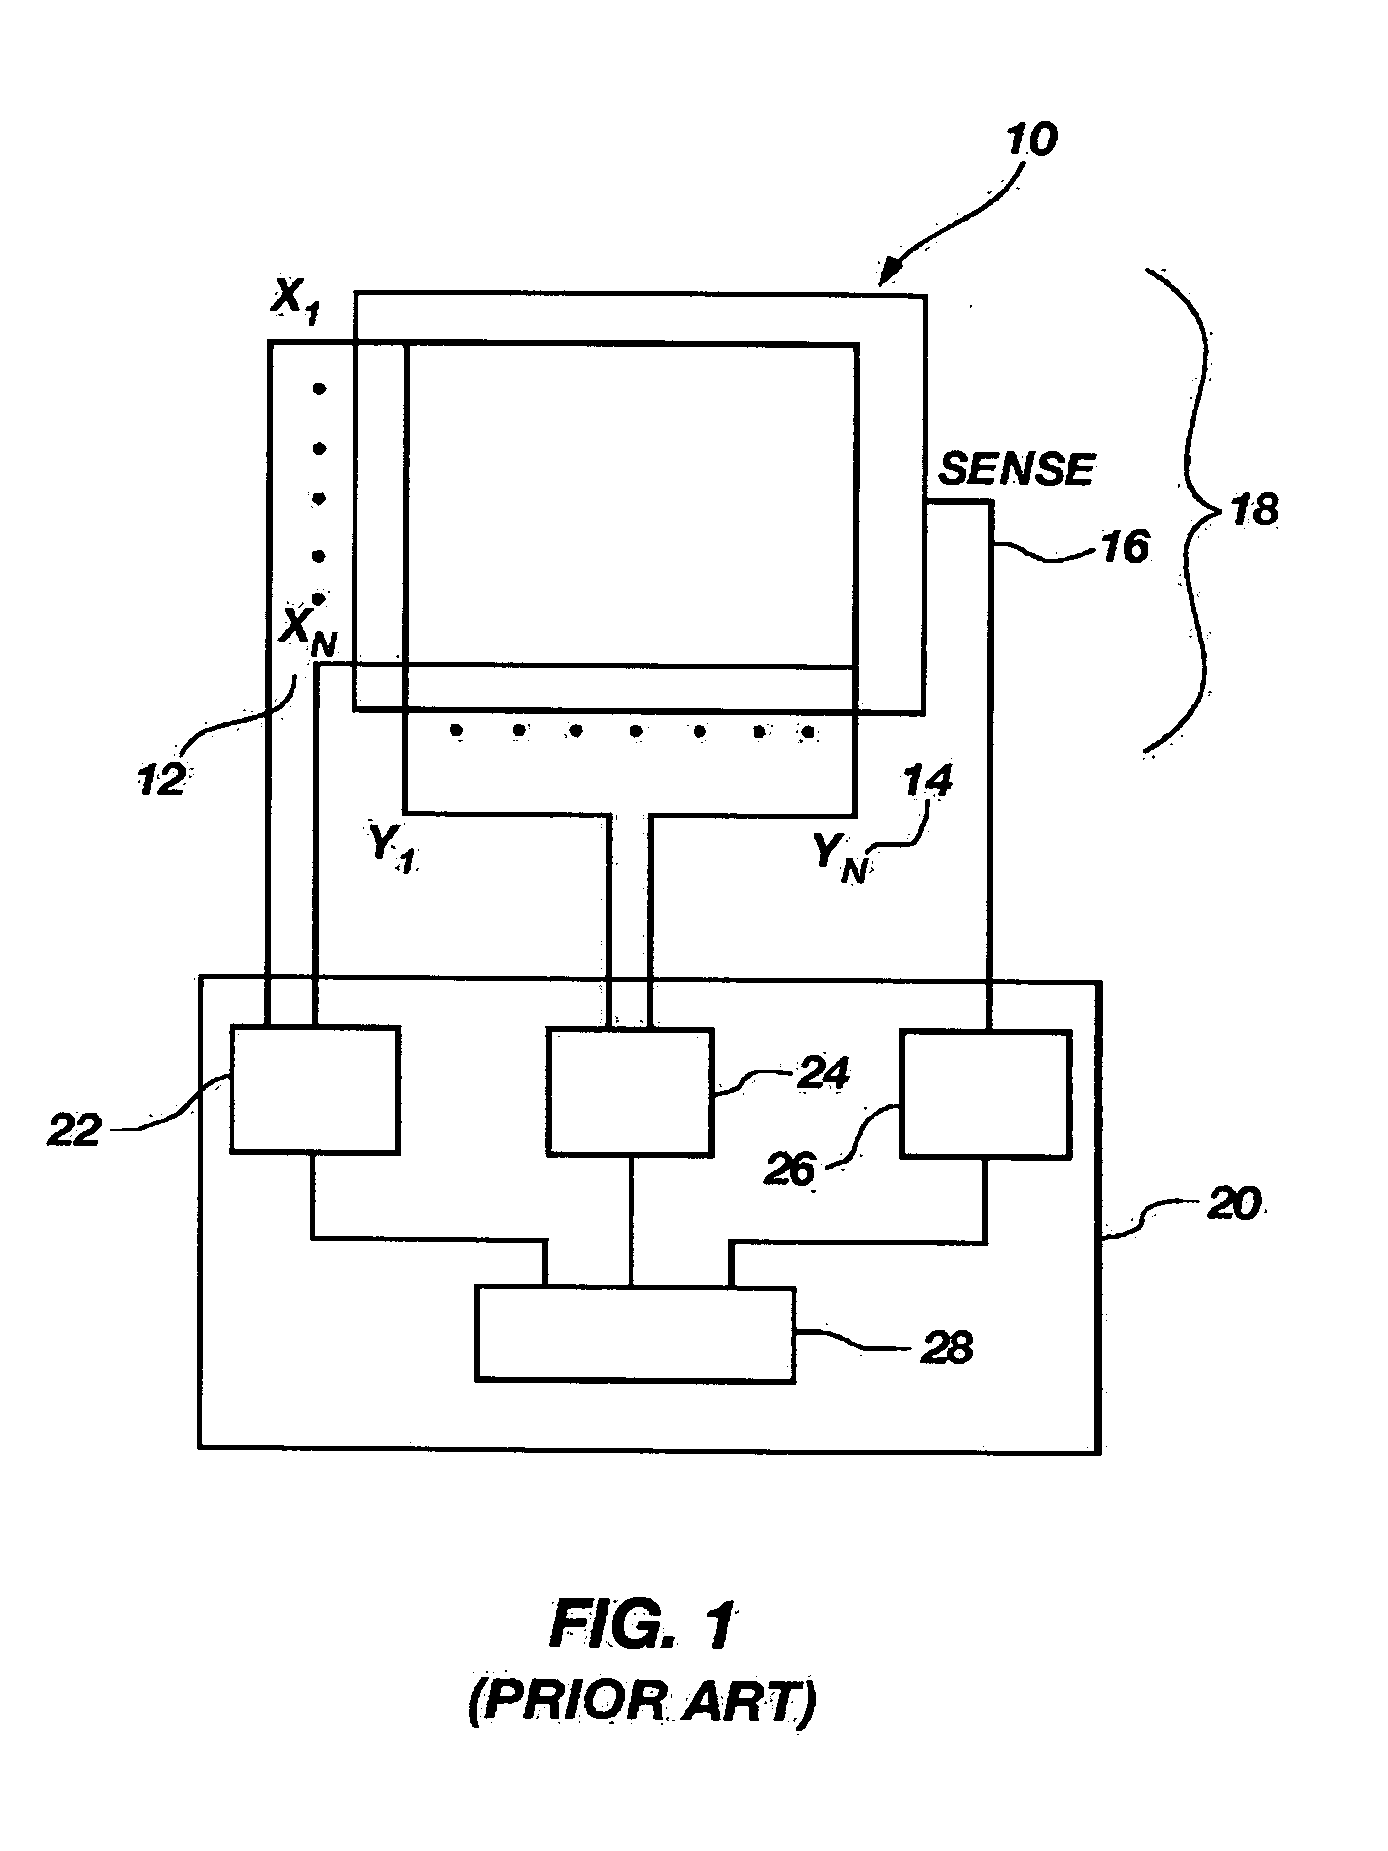 Method and system for performing scrolling by movement of a pointing object in a curvilinear path on a touchpad